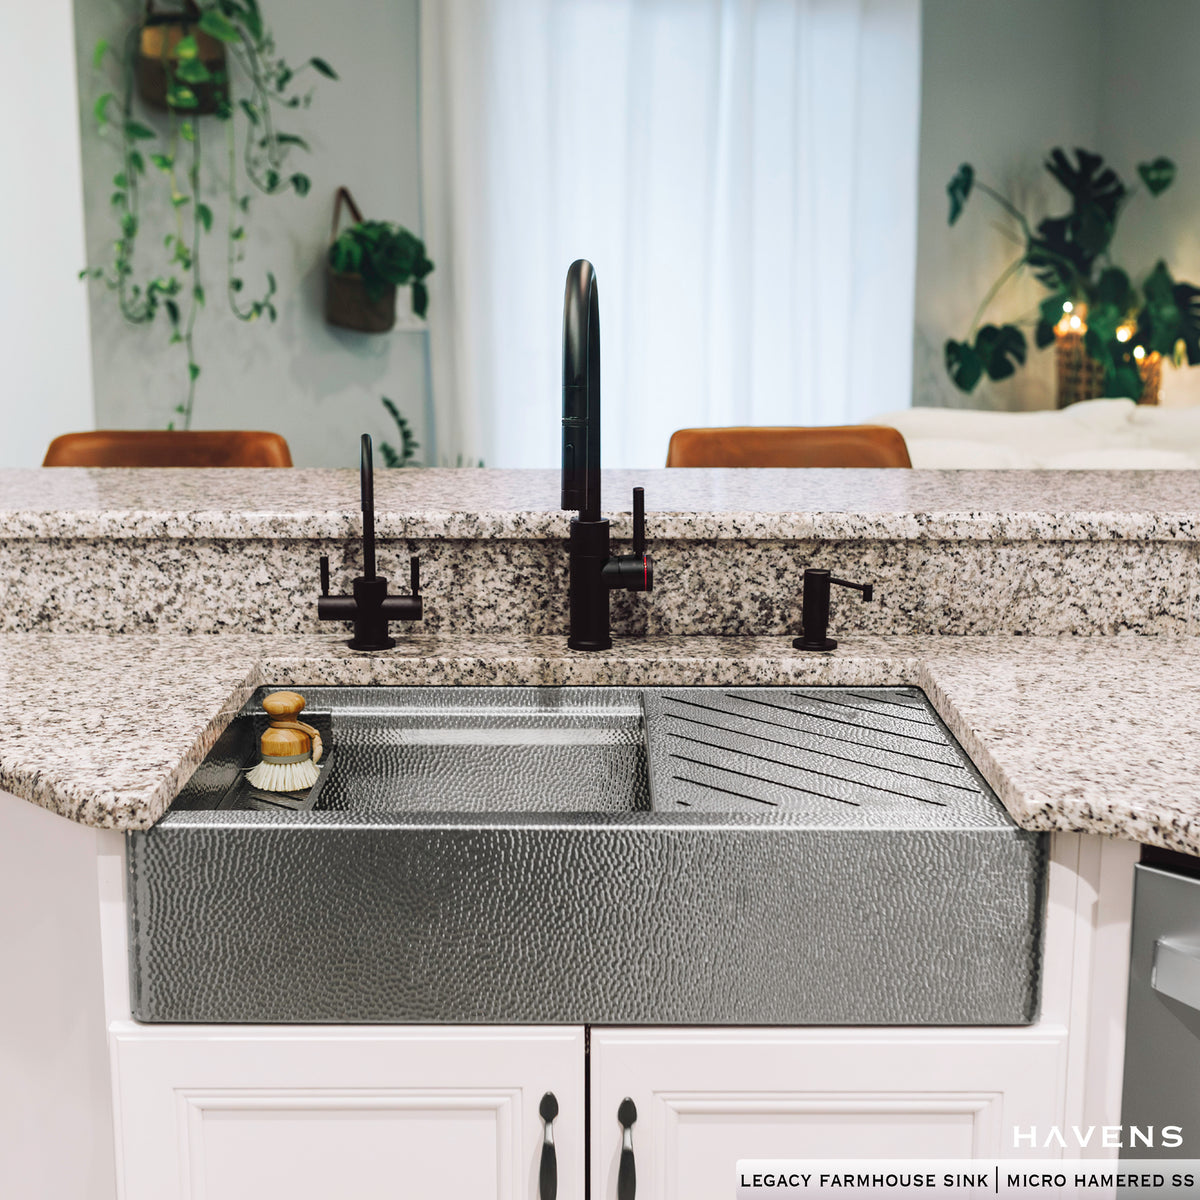 Legacy Farmhouse Sink - Stainless Steel - Havens | Luxury Metals